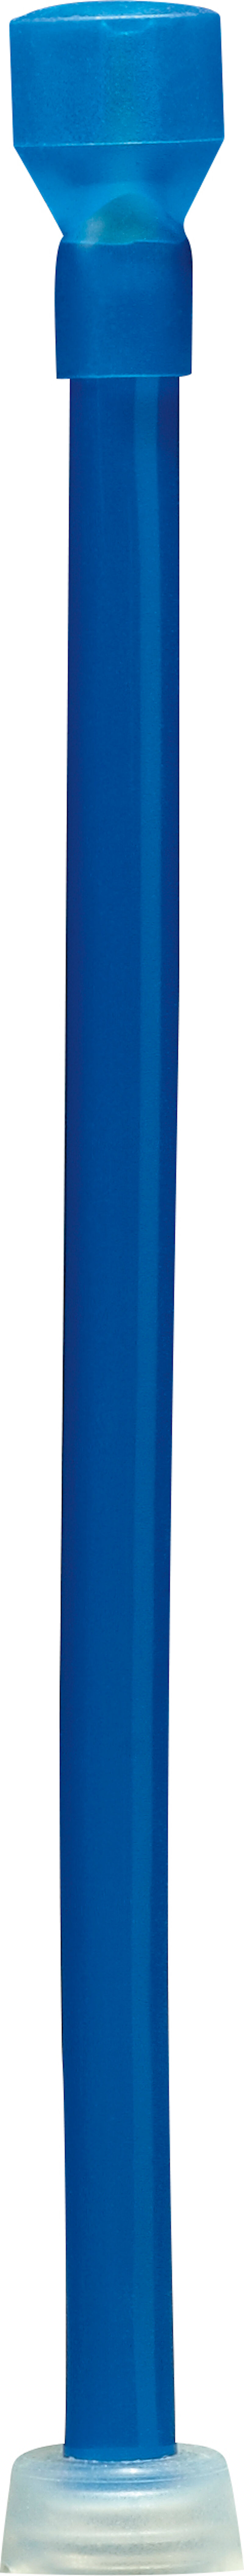 Camelbak Quick Stow Flask Tube Adapter - Filtr | Hardloop